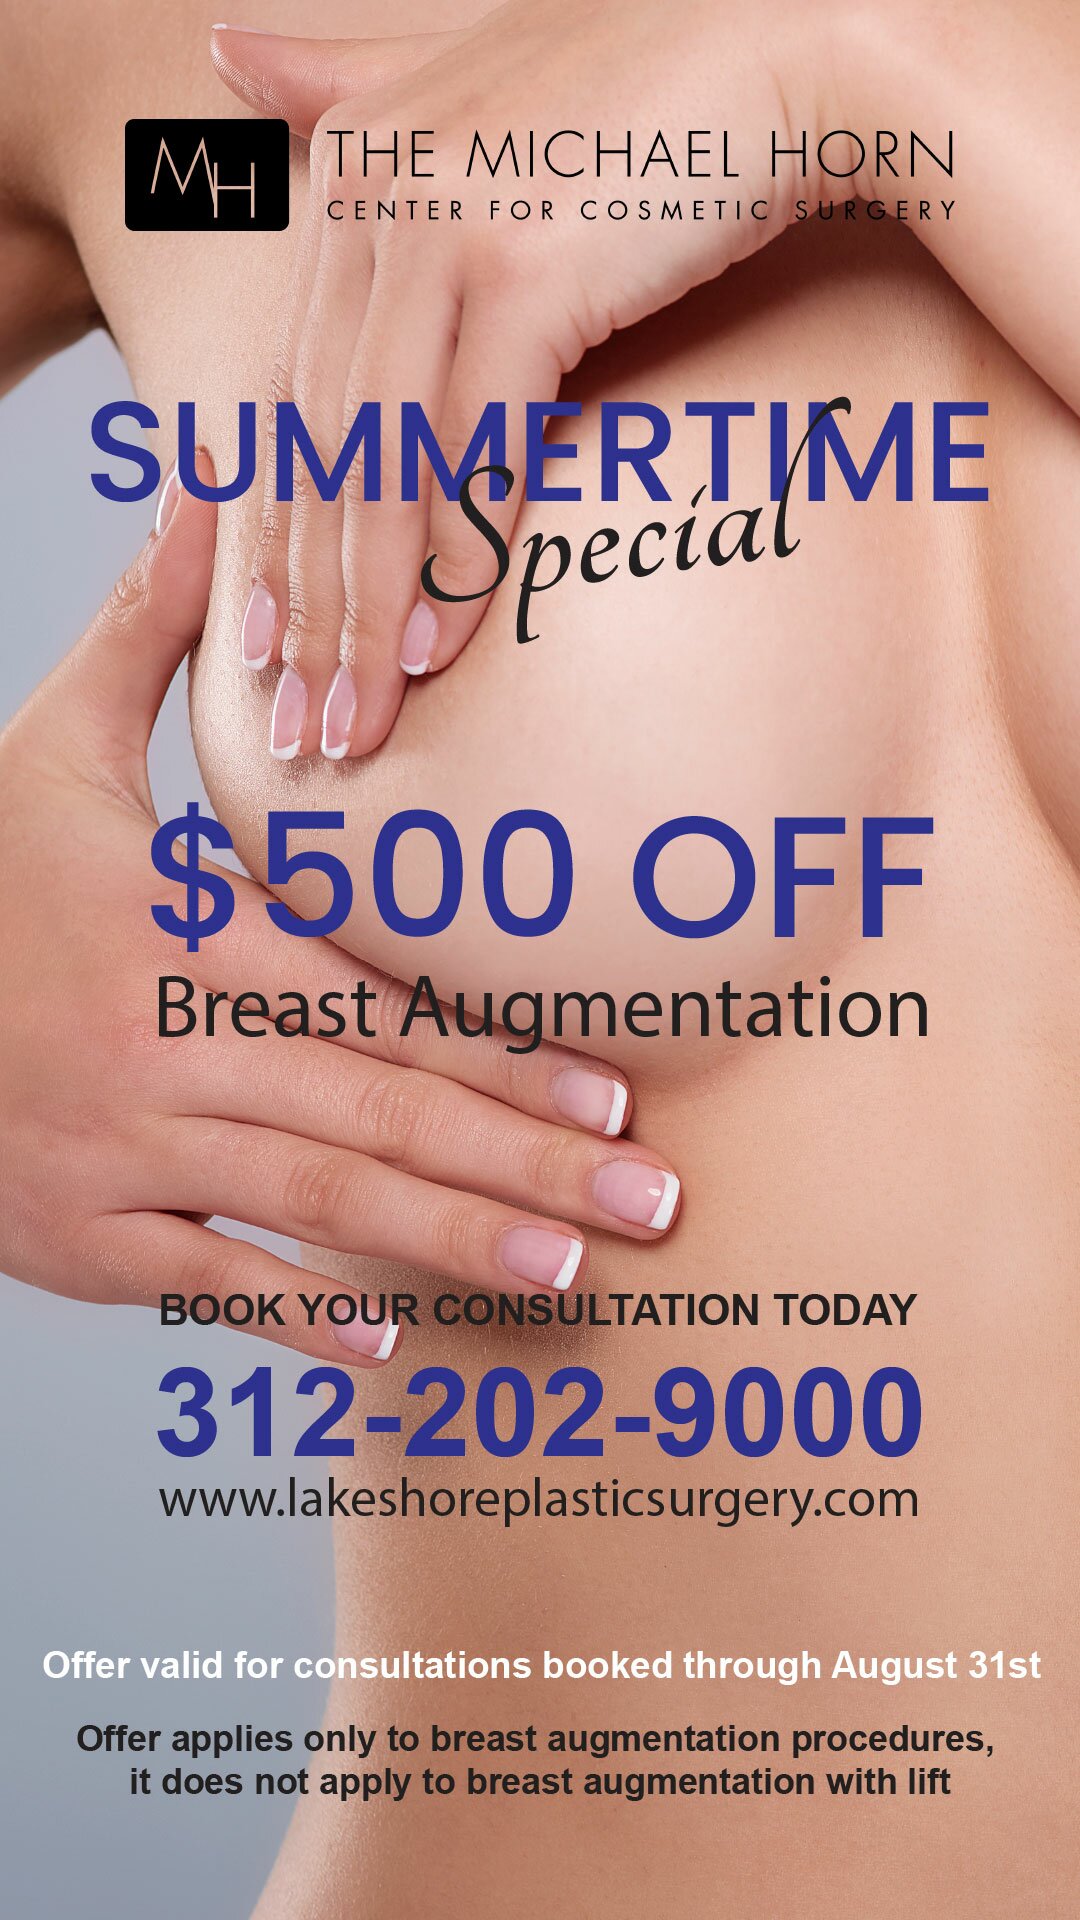 Special Offer - Summertime Special - $500 Off Breast Augmentation